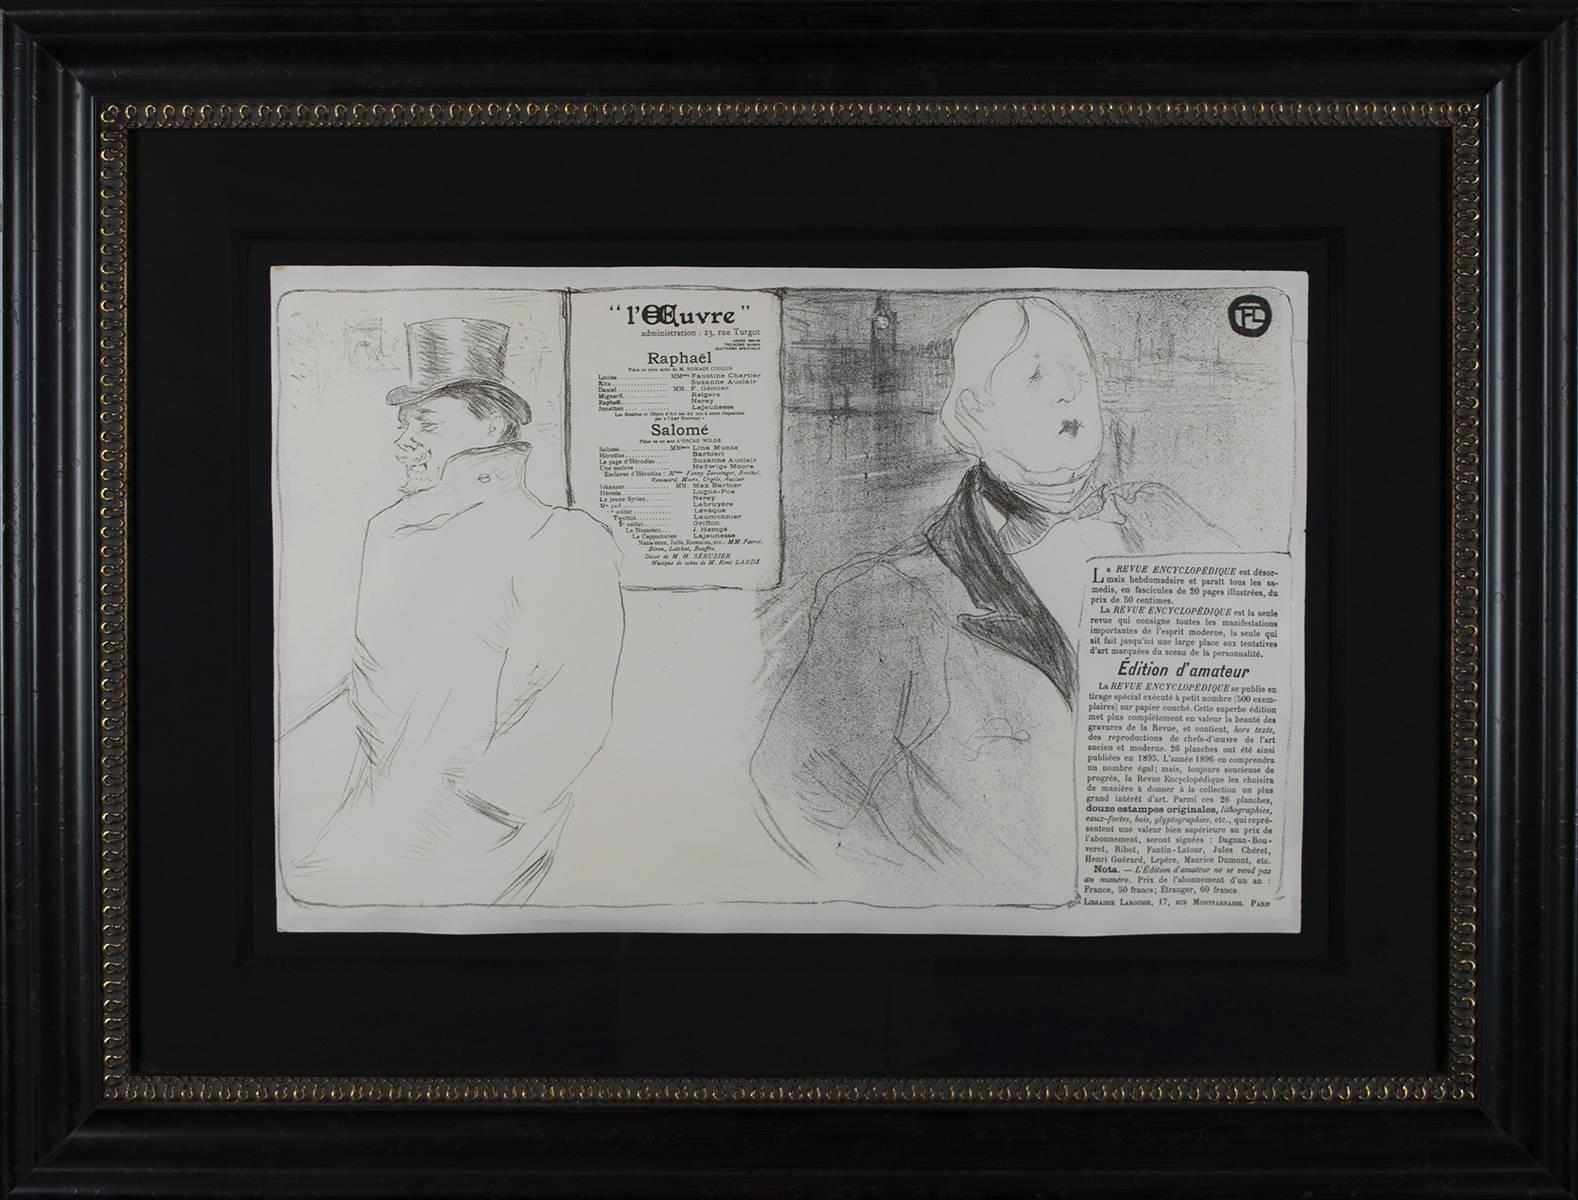 A French Turn of the Century theatre program by Henri de Toulouse-Lautrec, 1896. In this work commissioned by the Theatre de l'Oeuvre, Lautrec portrays the writers Romain Coulis (left) and Oscar Wilde (right.) In its final state, the lithograph was